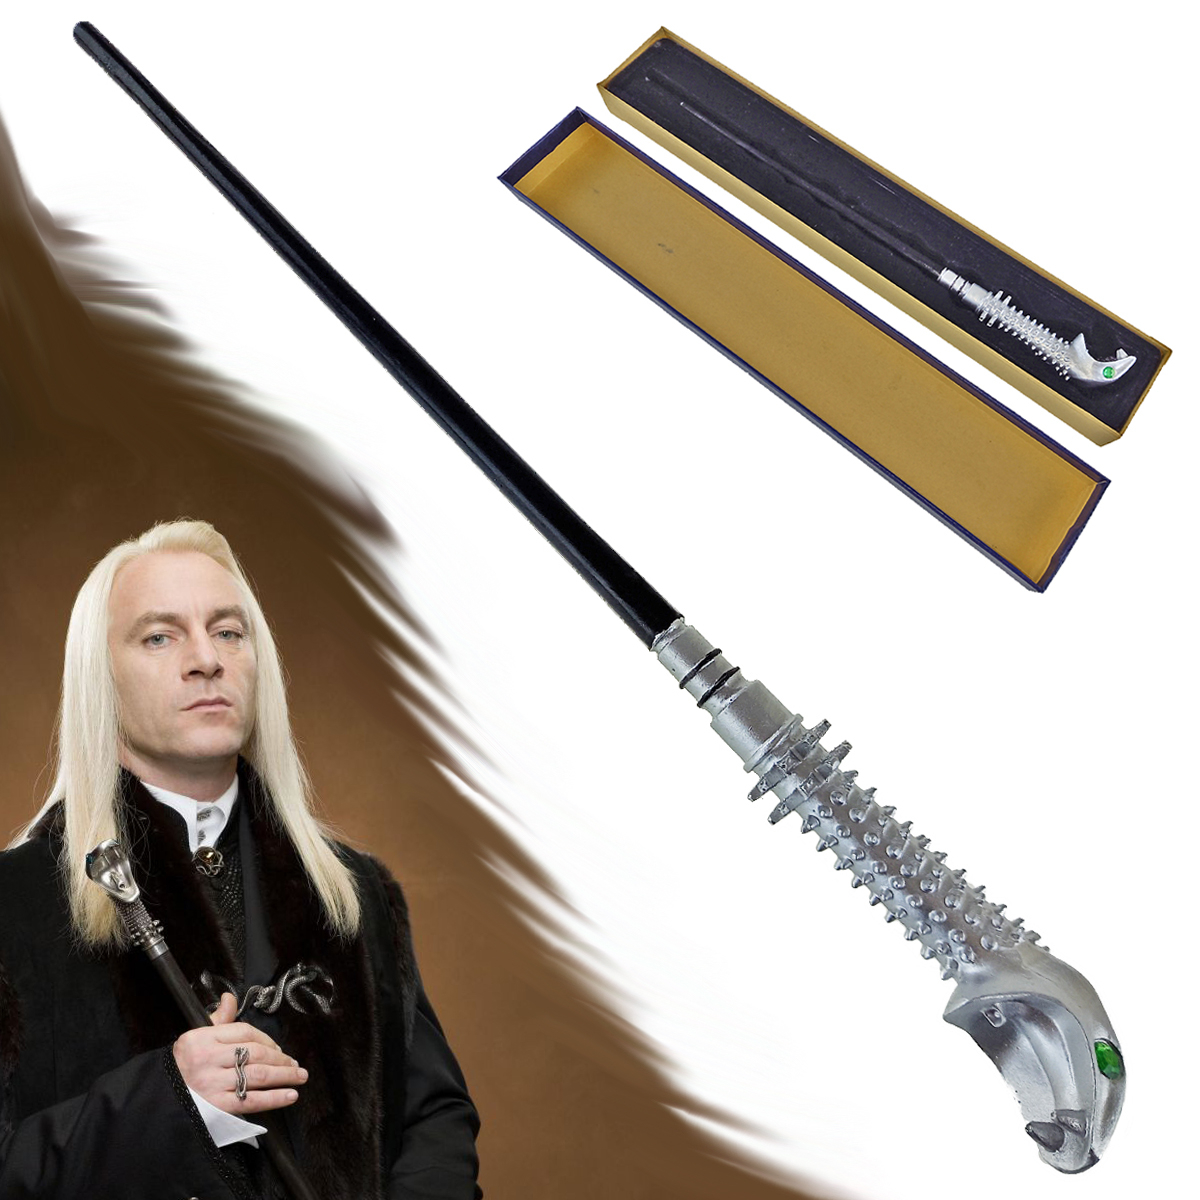 Magical wand "LUCIUS MALFOY" Harry Potter